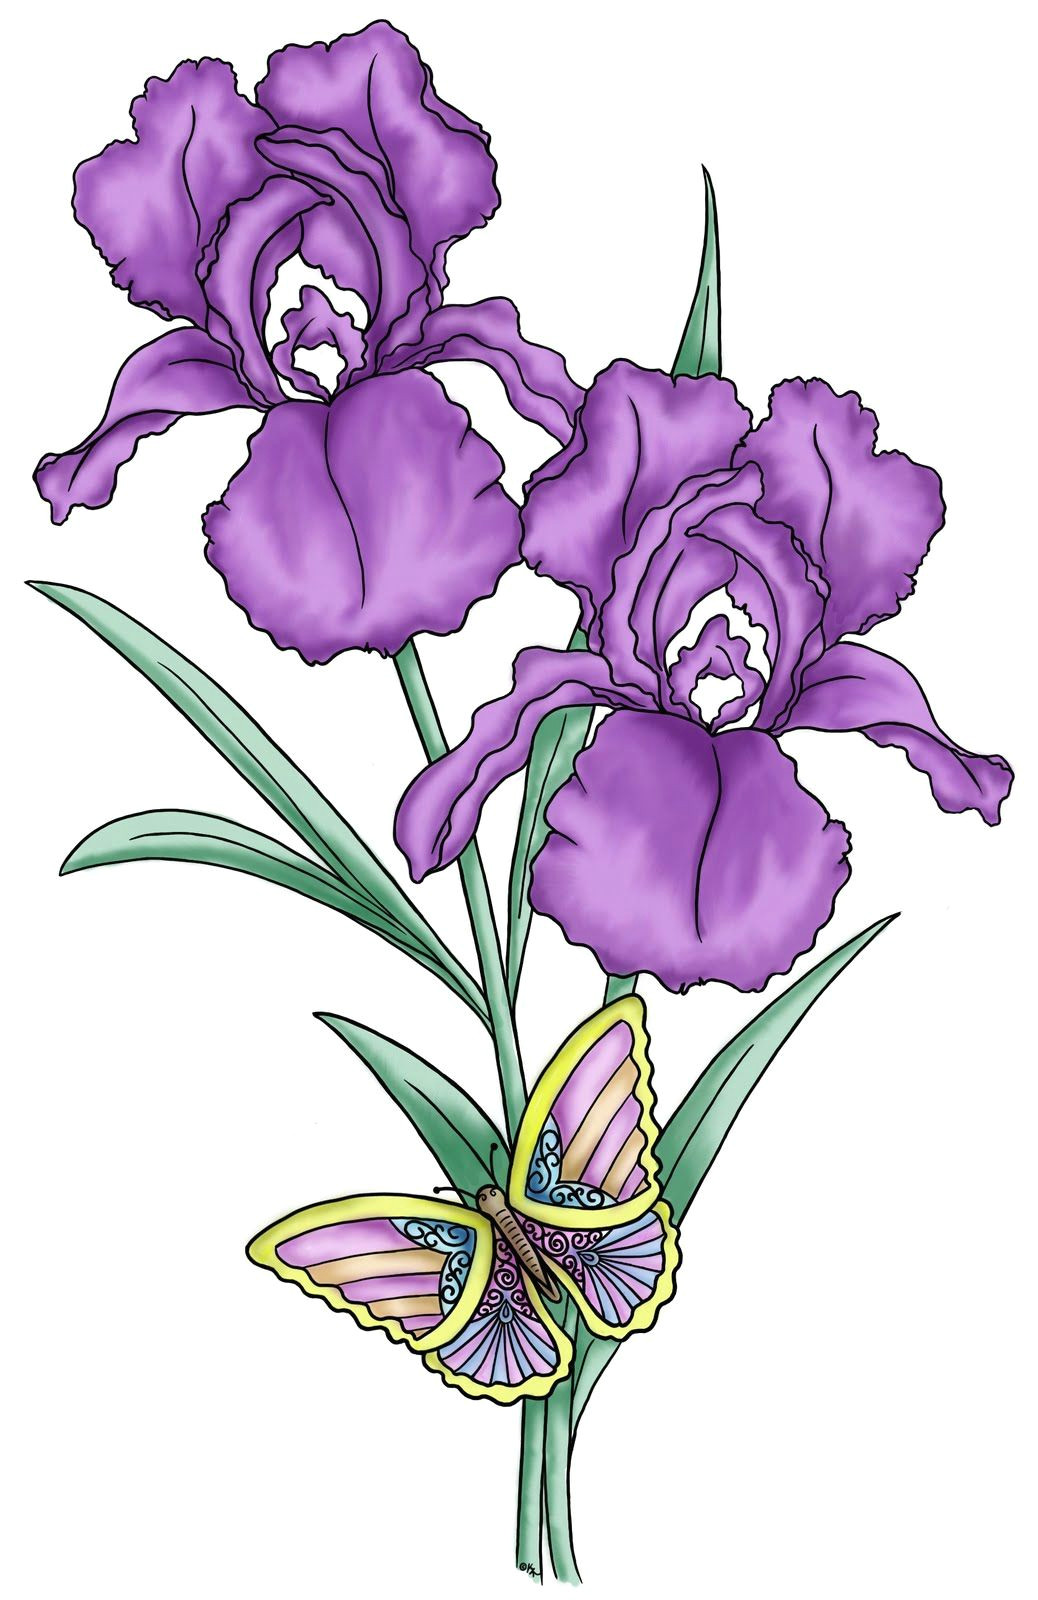 Drawings Of Iris Flowers the Iris Flower is Of Interest as An Example Of the Relation Between